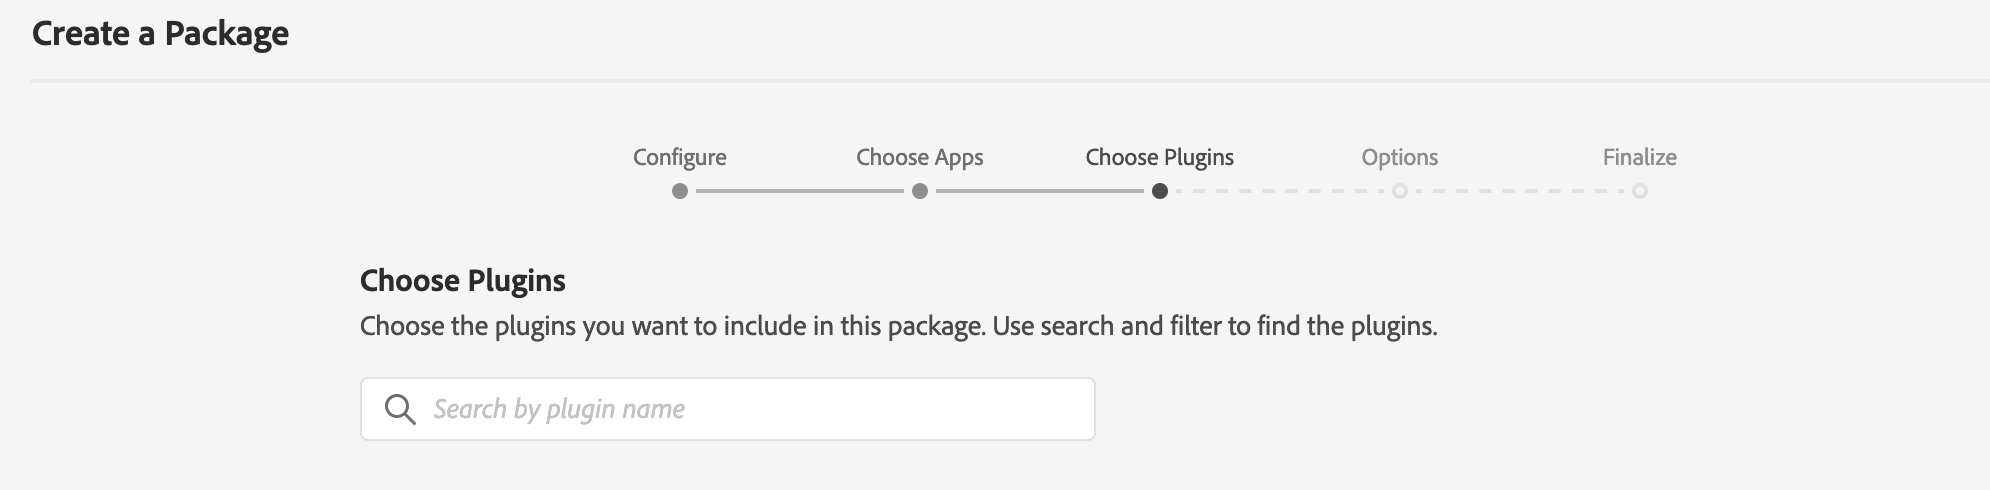 Adobe Admin Console - Create a Package - Package plugin selection